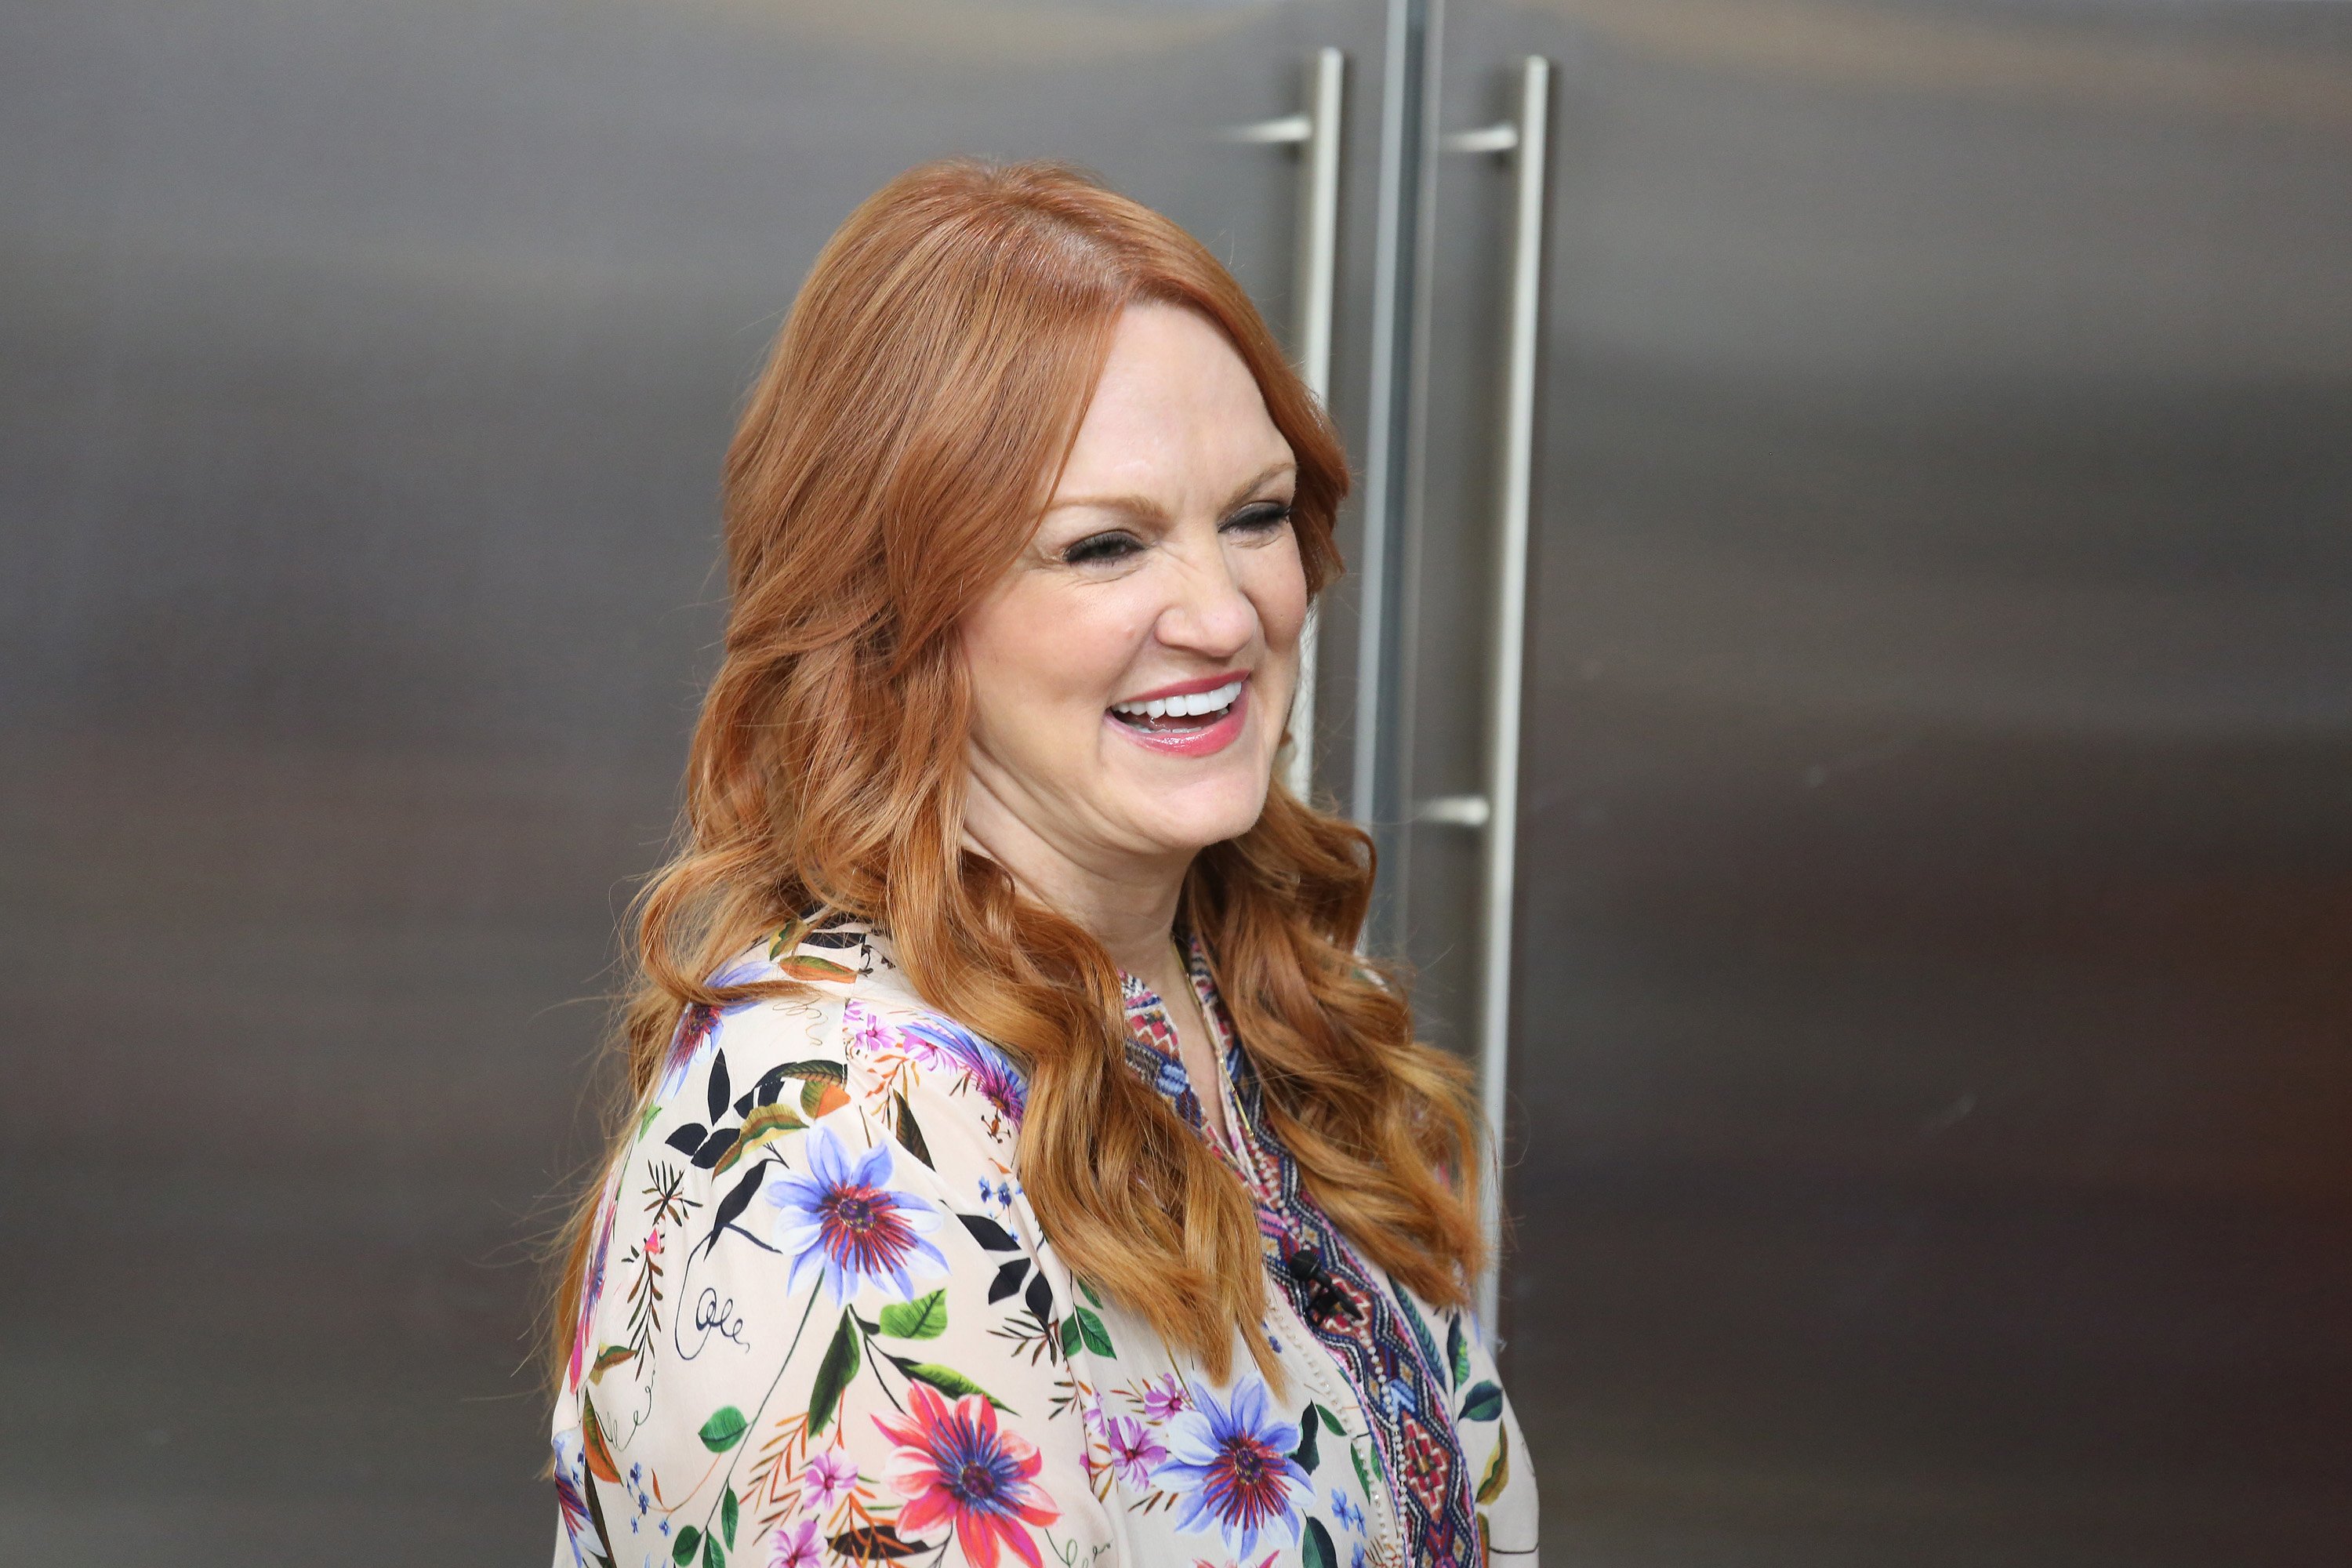 Ree Drummond Said She's 'Obsessed' With Her Air Fryer: 'The